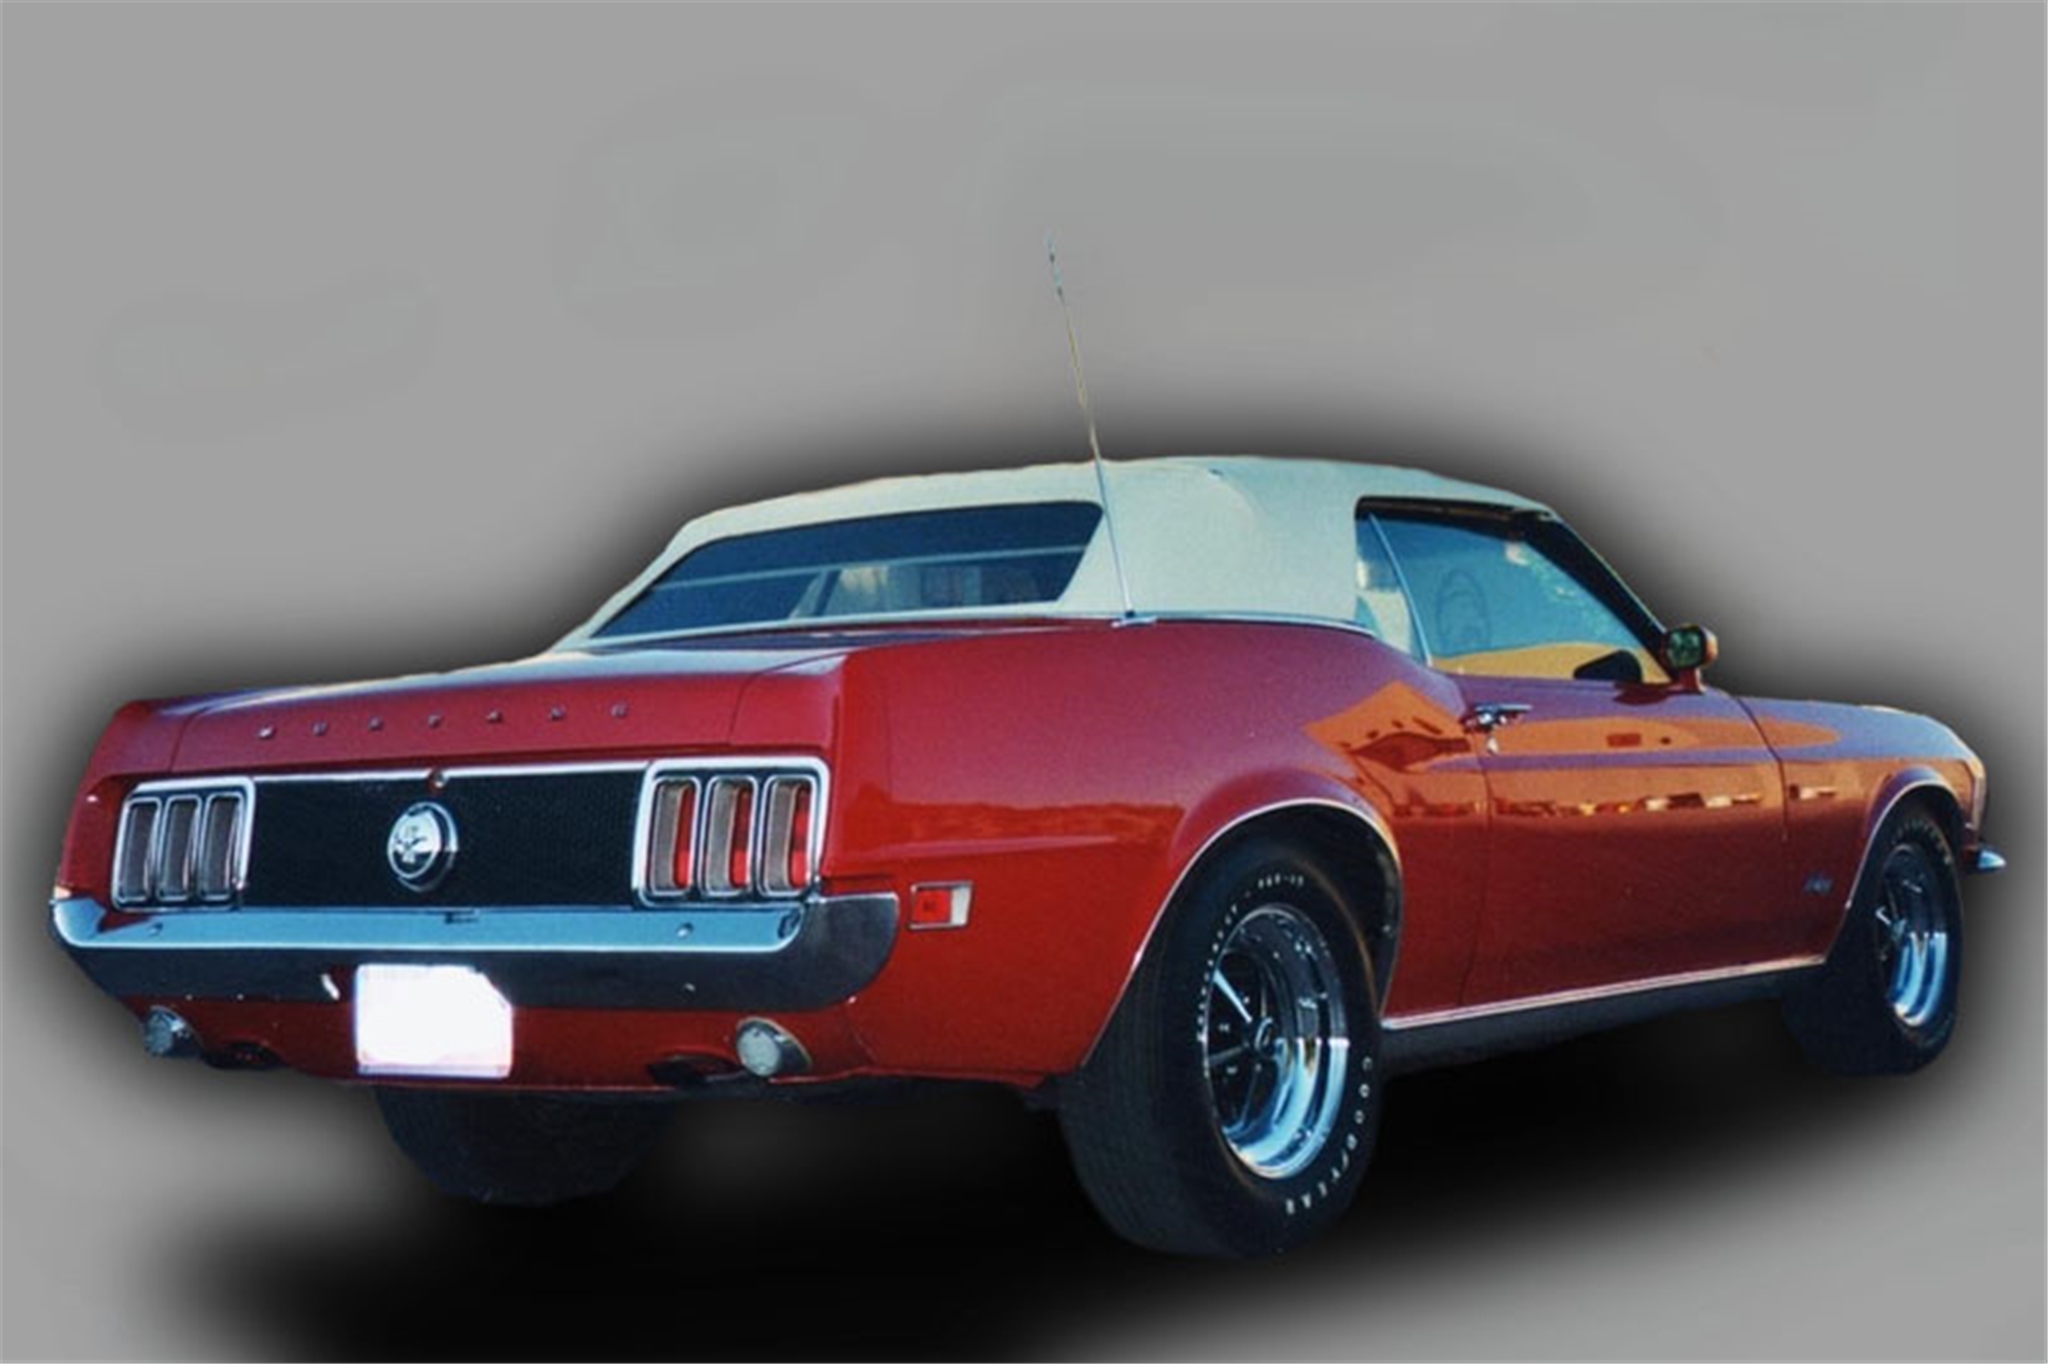 1969-1970 Ford Mustang Top & Folding Glass Window